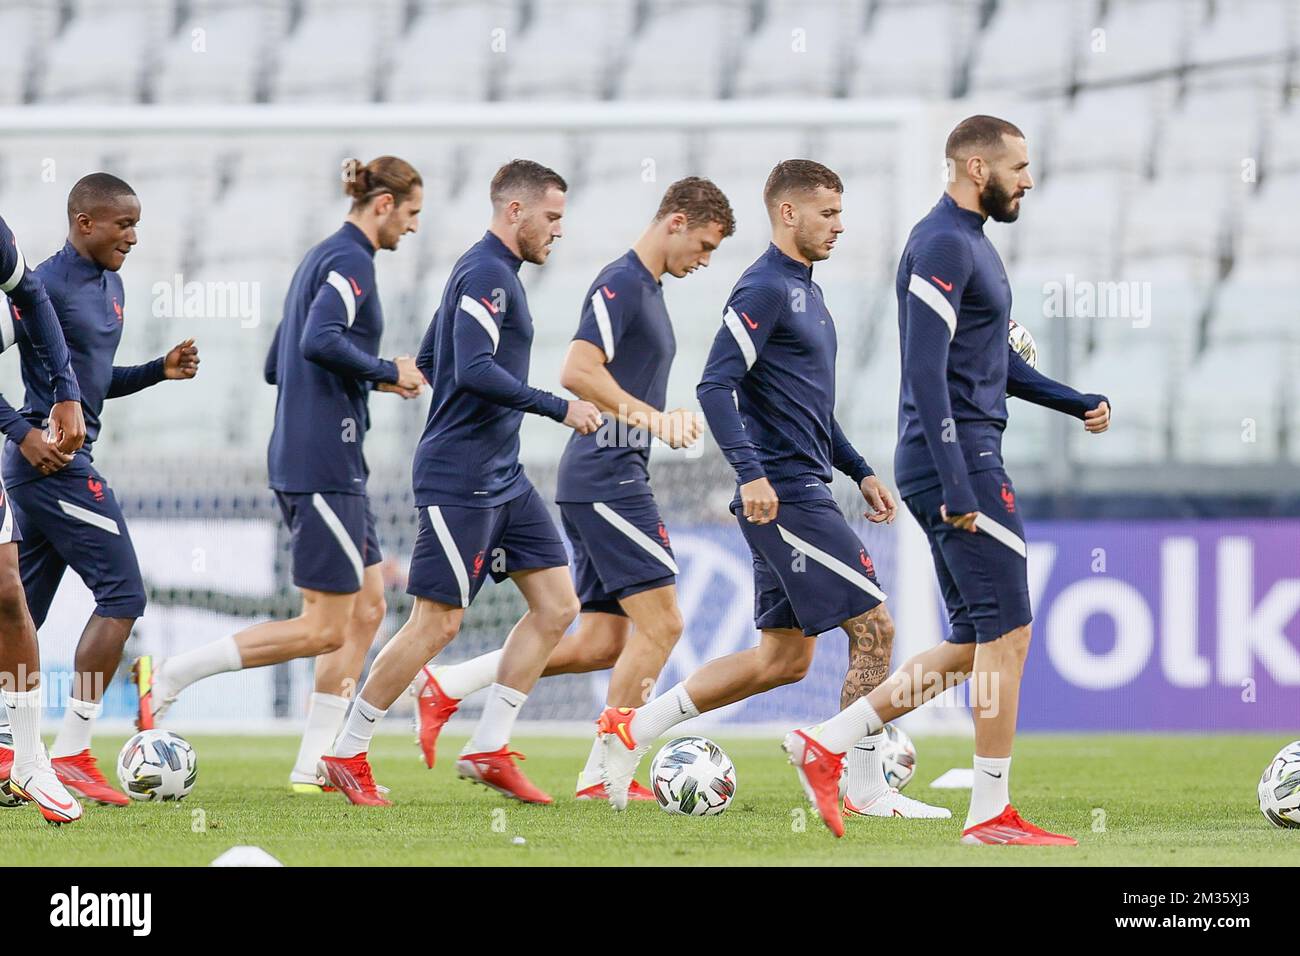 France's players pictured during a training session of the French national soccer team, in Torino, Italy, on Wednesday 06 October 2021. The team is preparing for the semi-finals of the Nations League, against Belgium on Thursday. BELGA PHOTO BRUNO FAHY Stock Photo